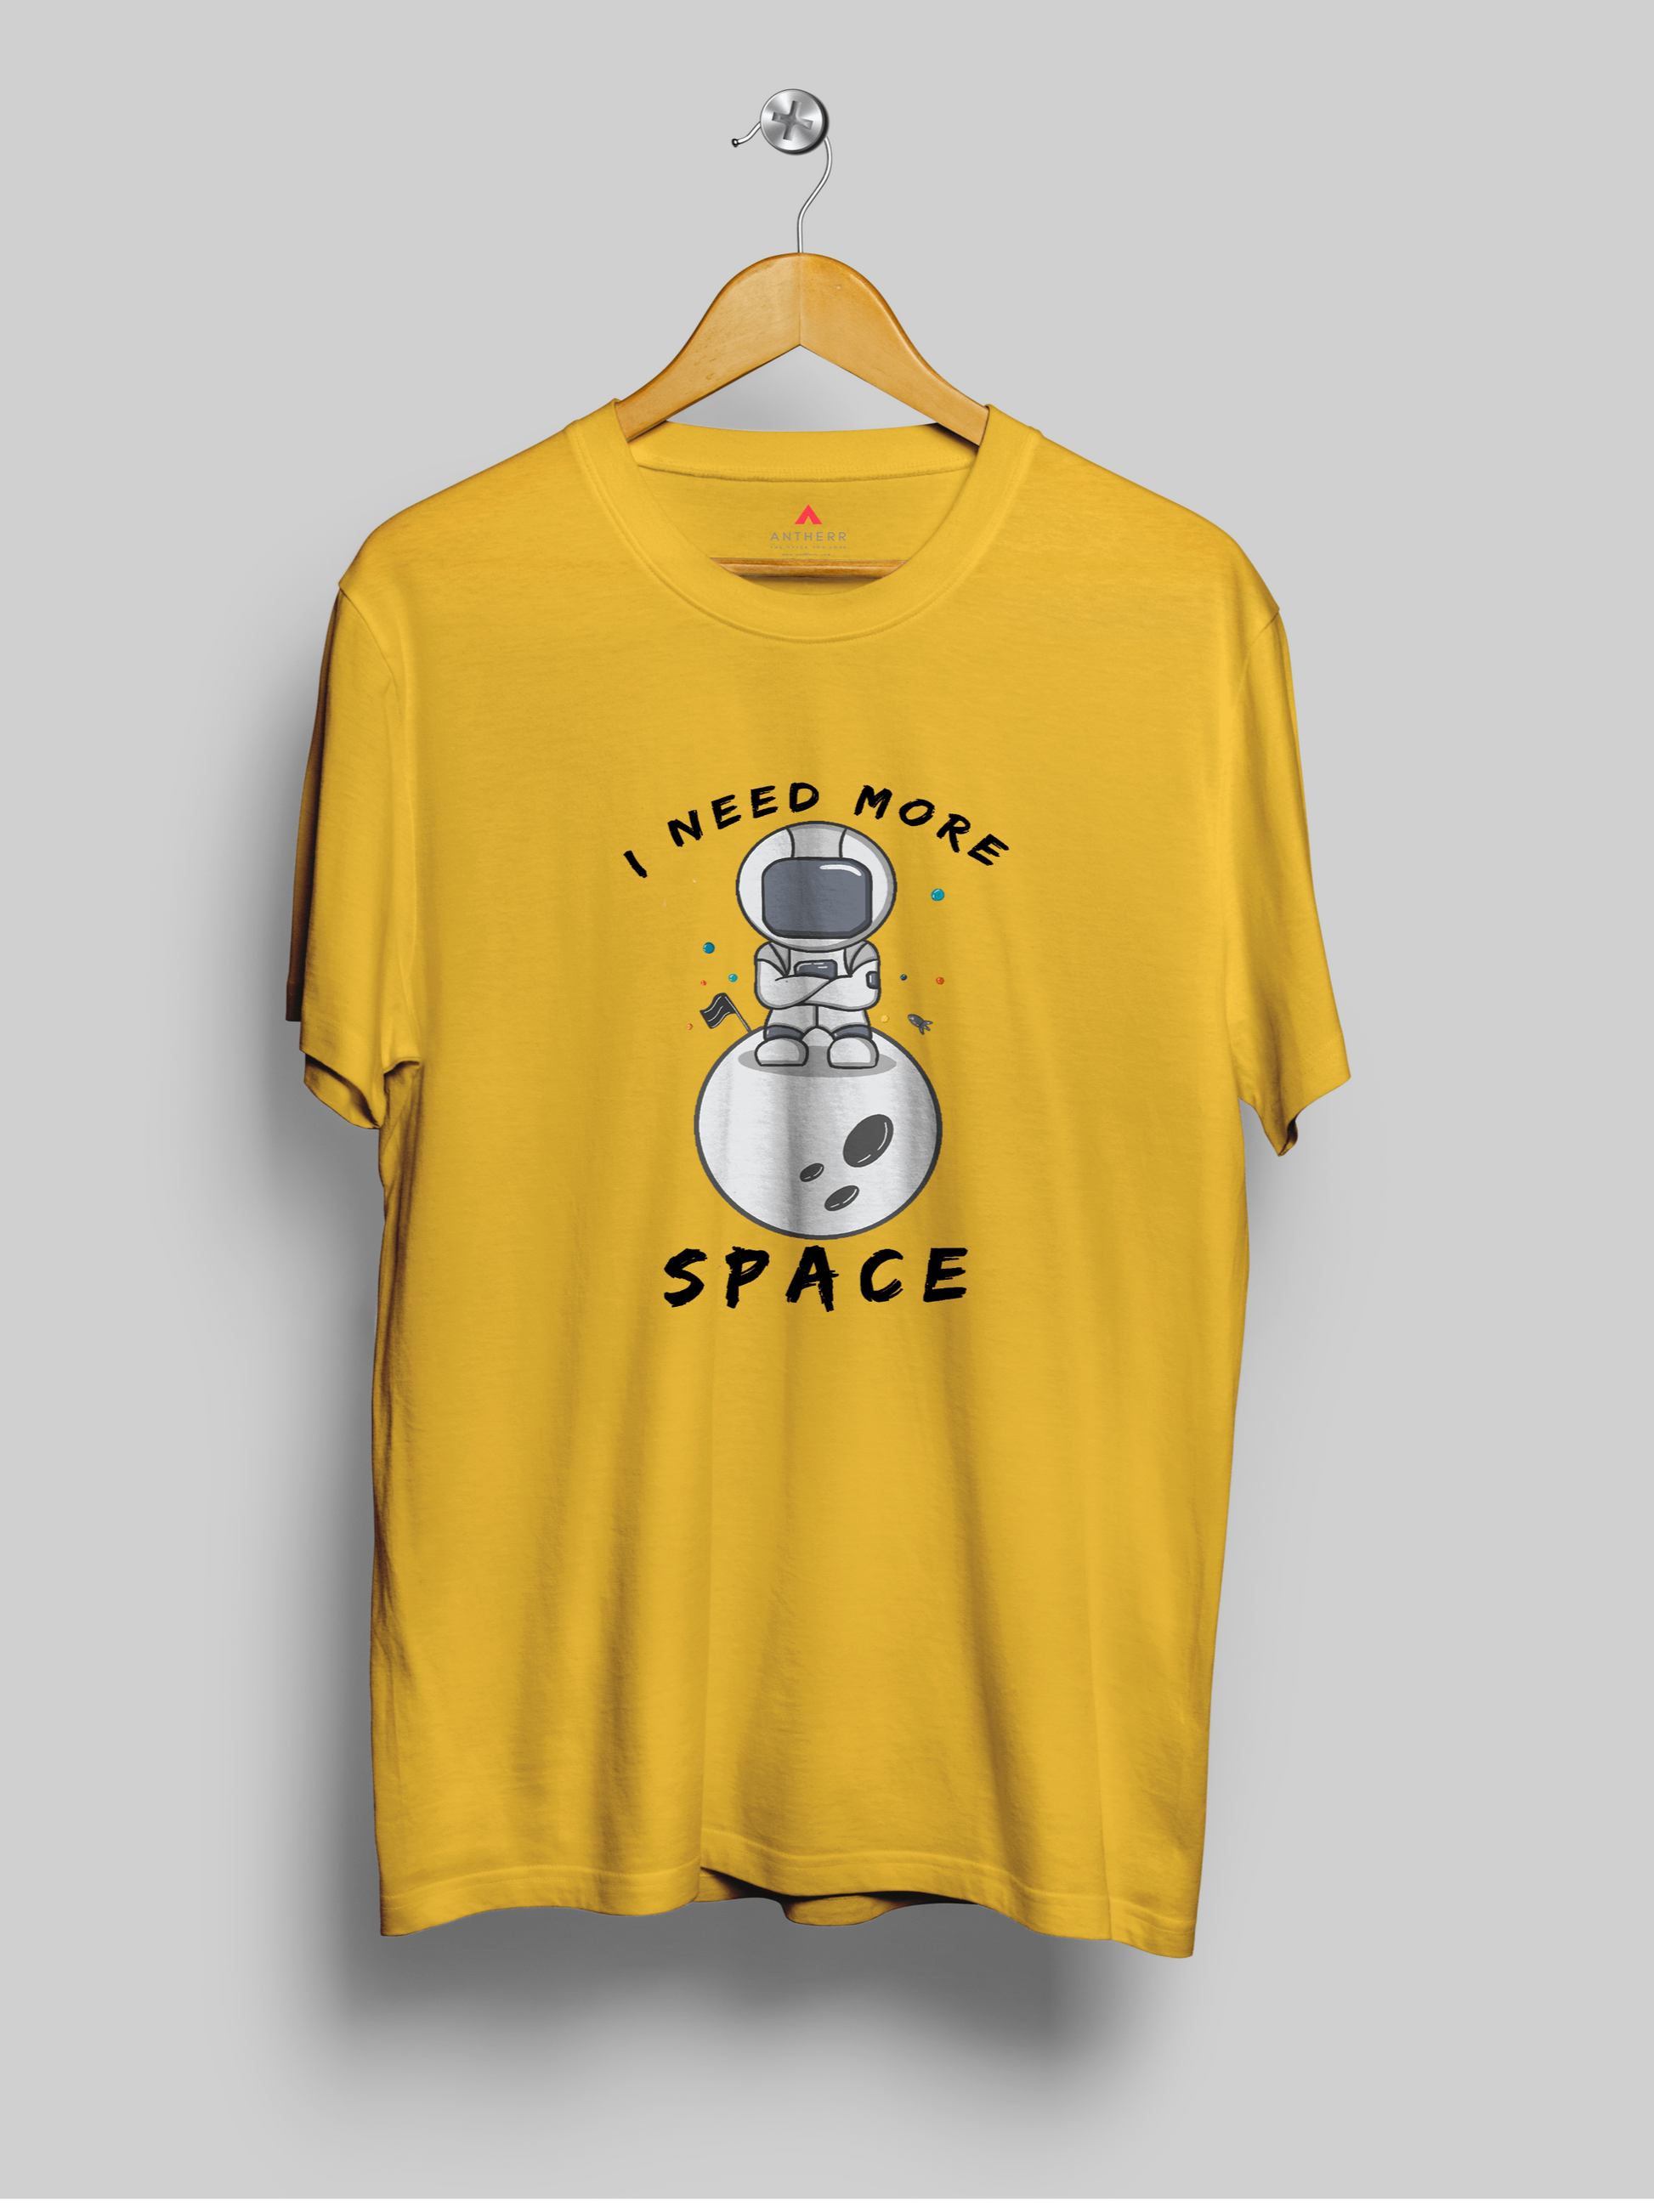 " I NEED MORE SPACE " - UNISEX HALF-SLEEVE T-SHIRTS YELLOW